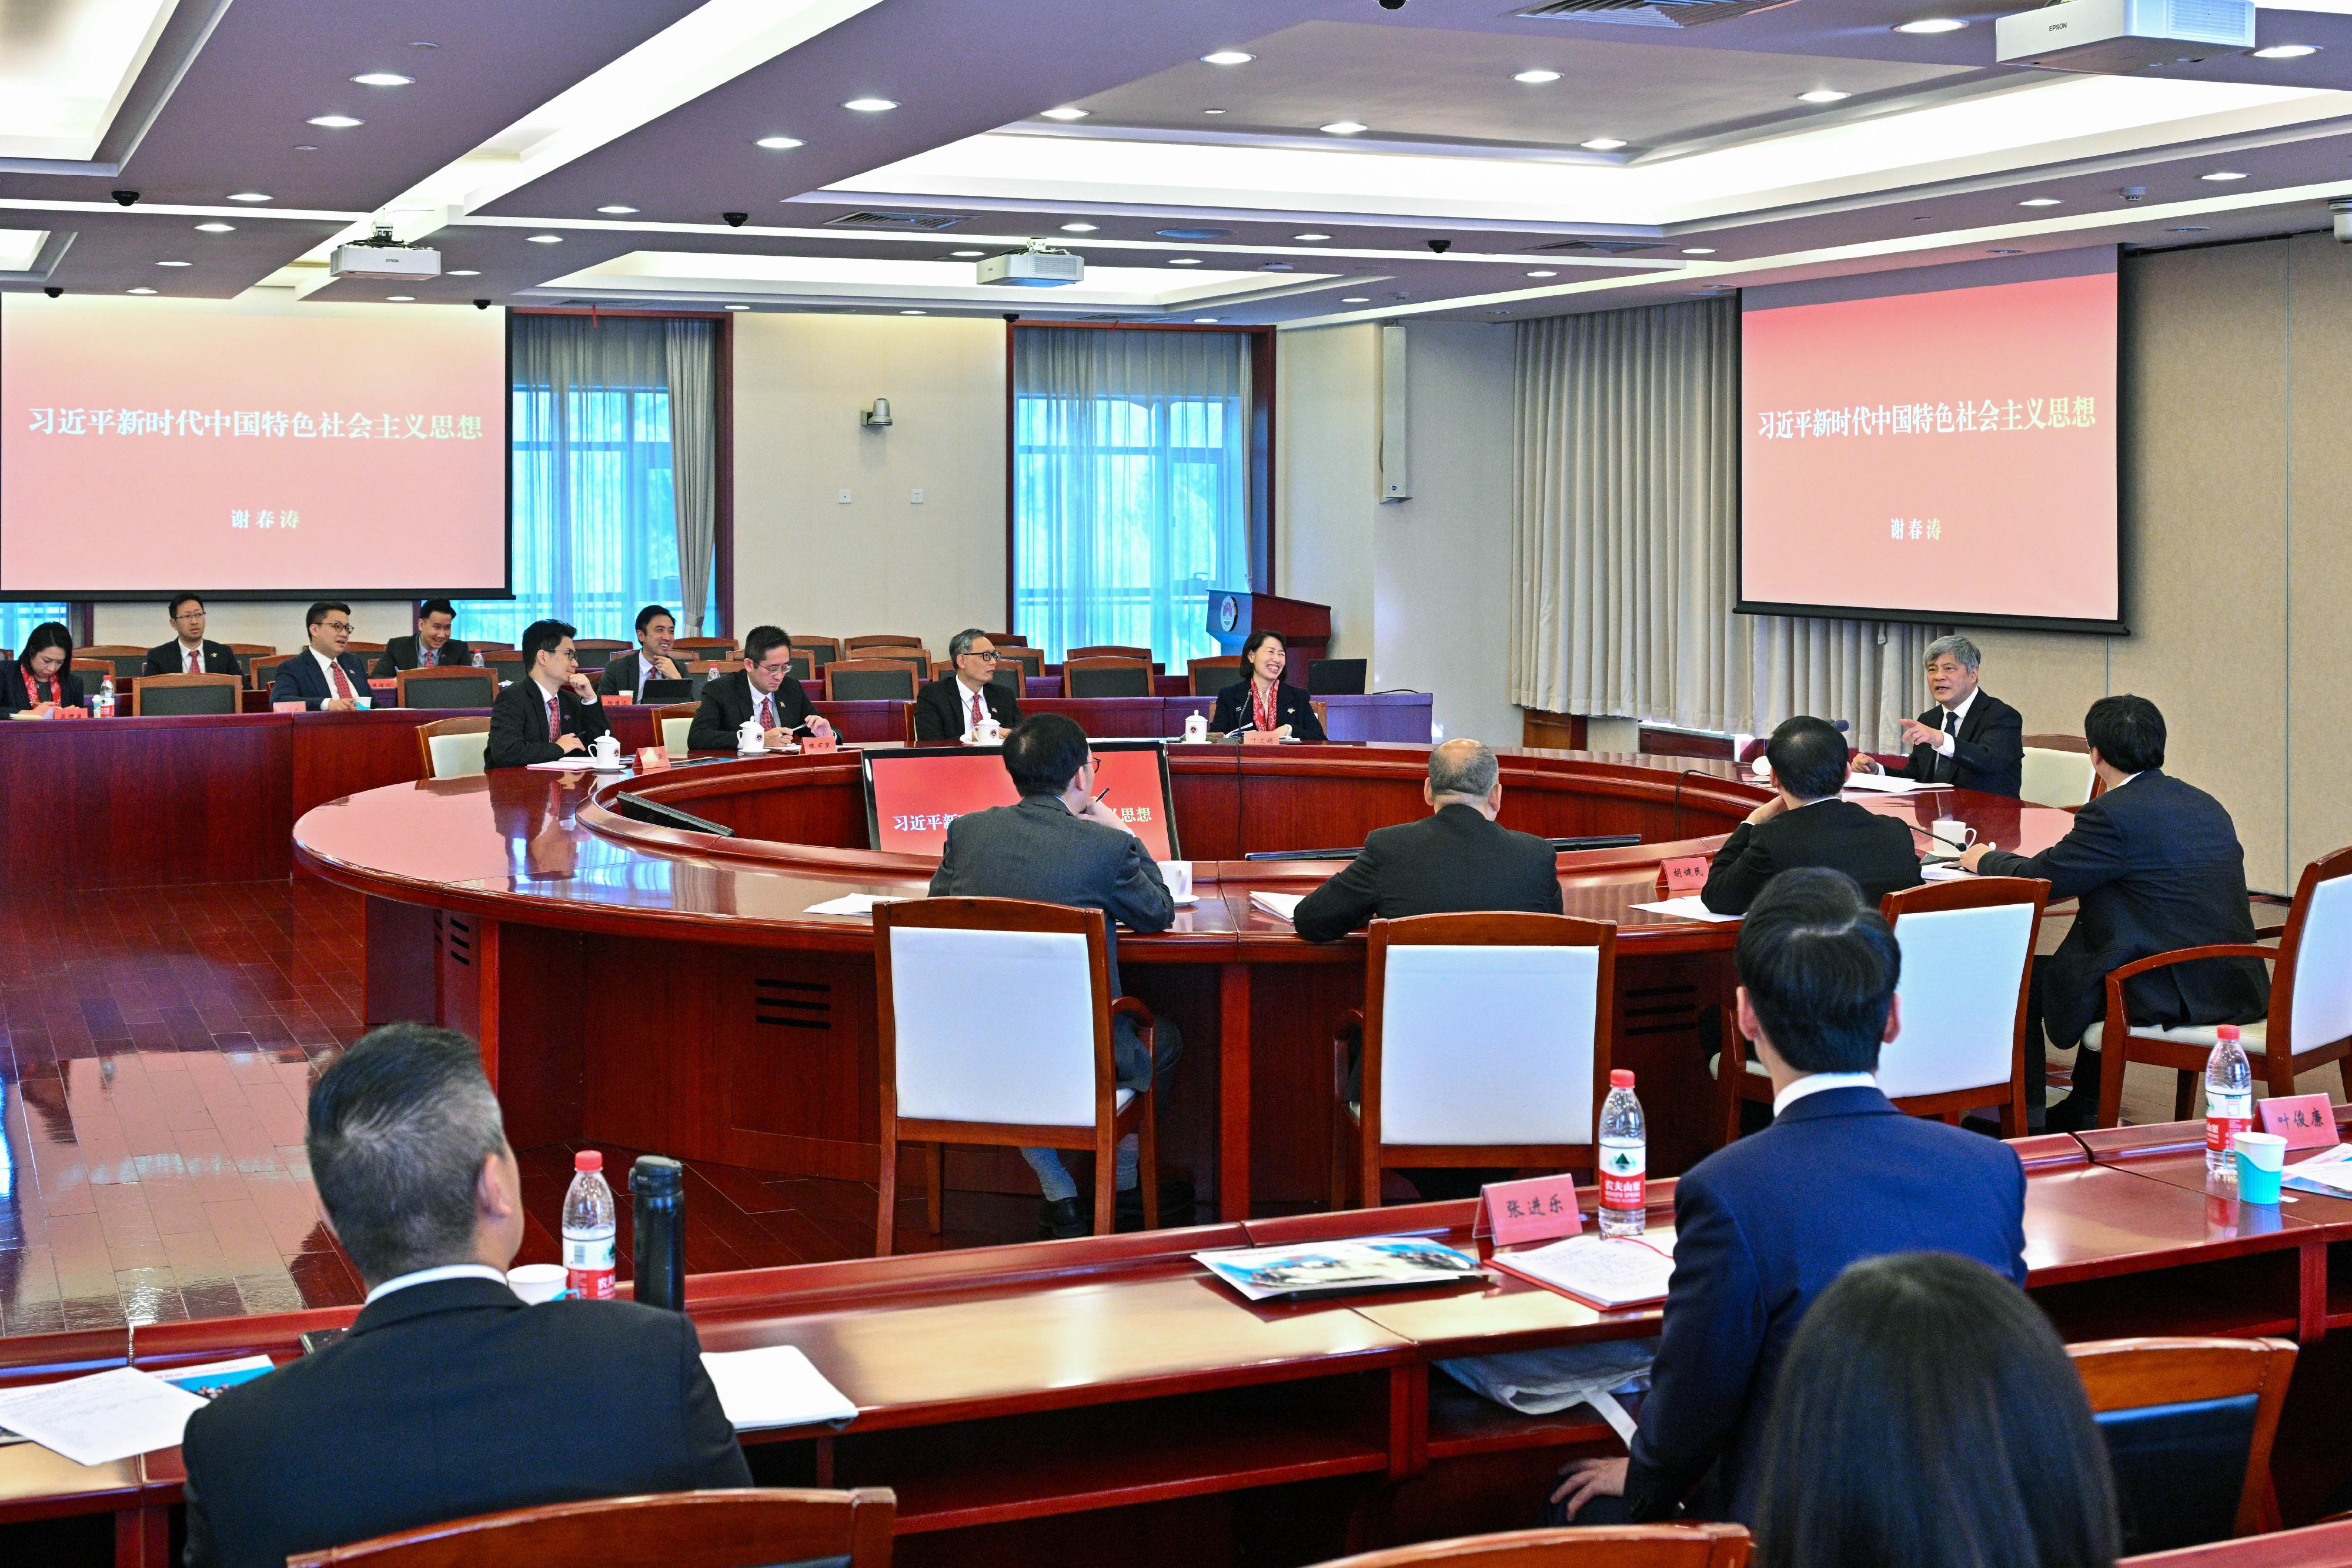 The Executive Vice President of the National Academy of Governance in charge of daily operations, Professor Xie Chuntao, today (November 22) gives a lecture to politically appointed officials on the Xi Jinping Thought on Socialism with Chinese Characteristics for a New Era.